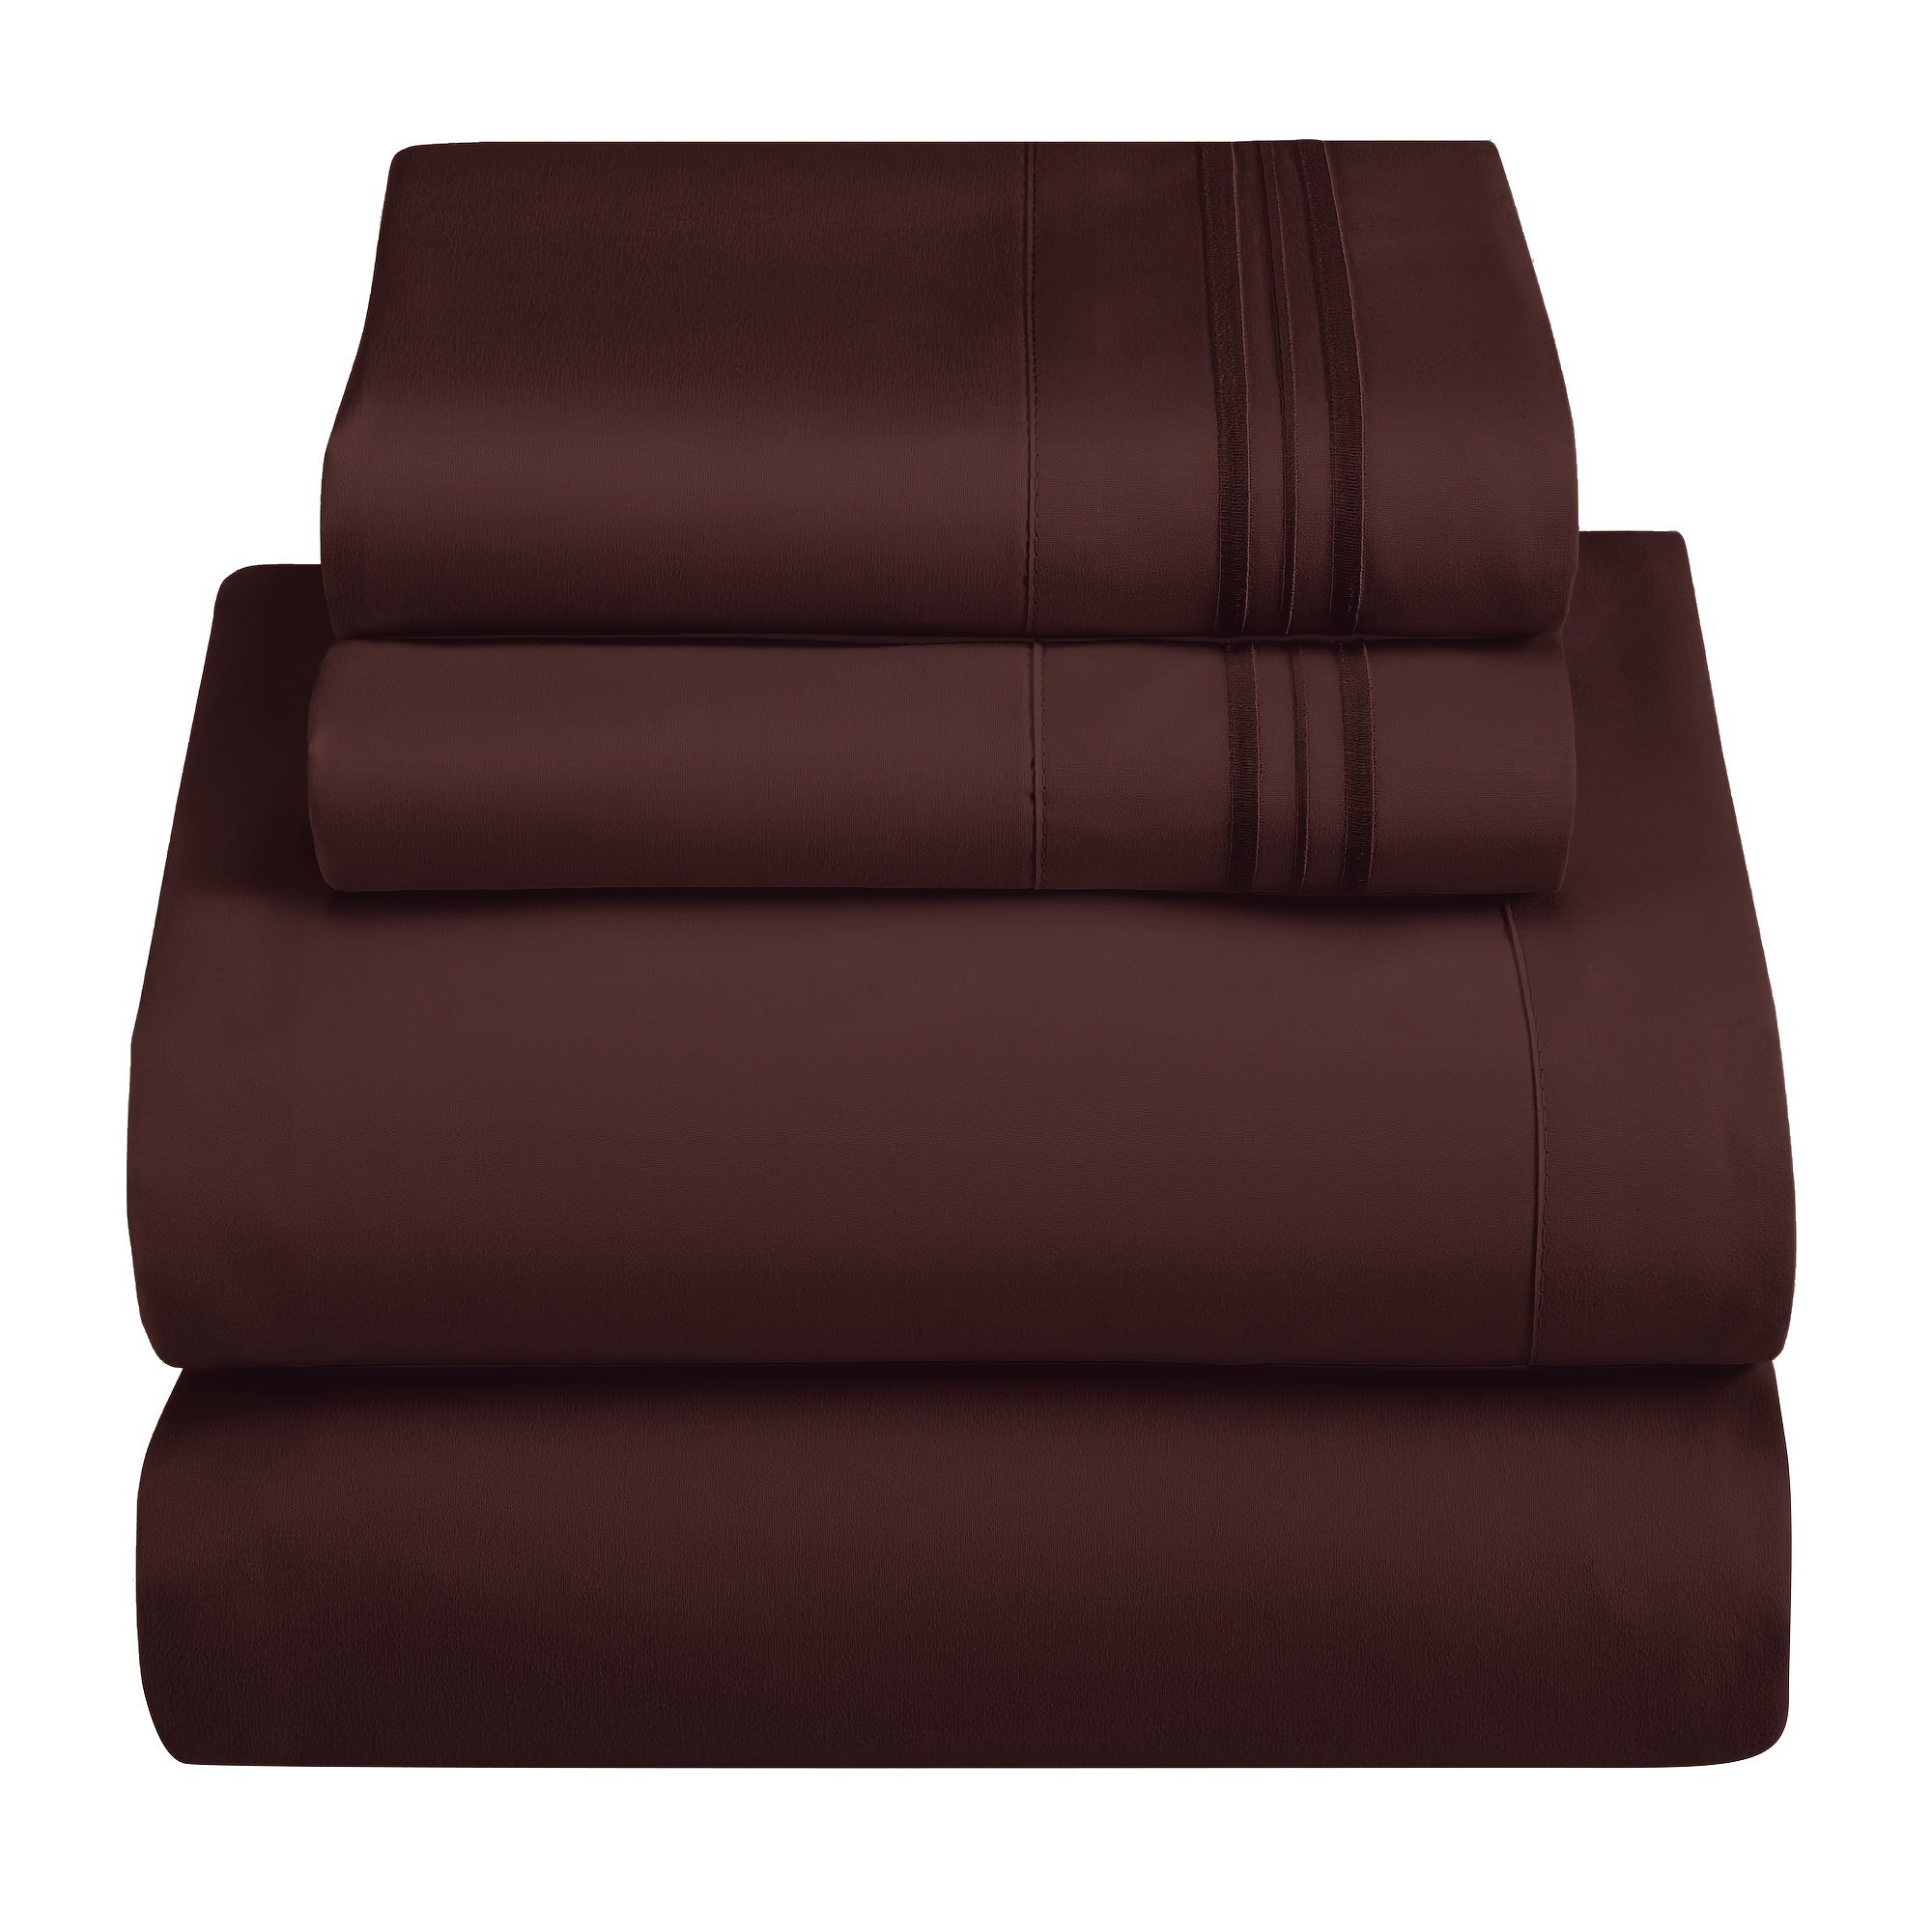 

3/4pcs Deep Pocket Queen Sheet Set Pretty Dark Brown Color, Ultra Plush Cozy Feel Casual Comfy All Season, Girls Bedding Easy Fit Silky Soft Texture Flexible Durable Hotel Holiday